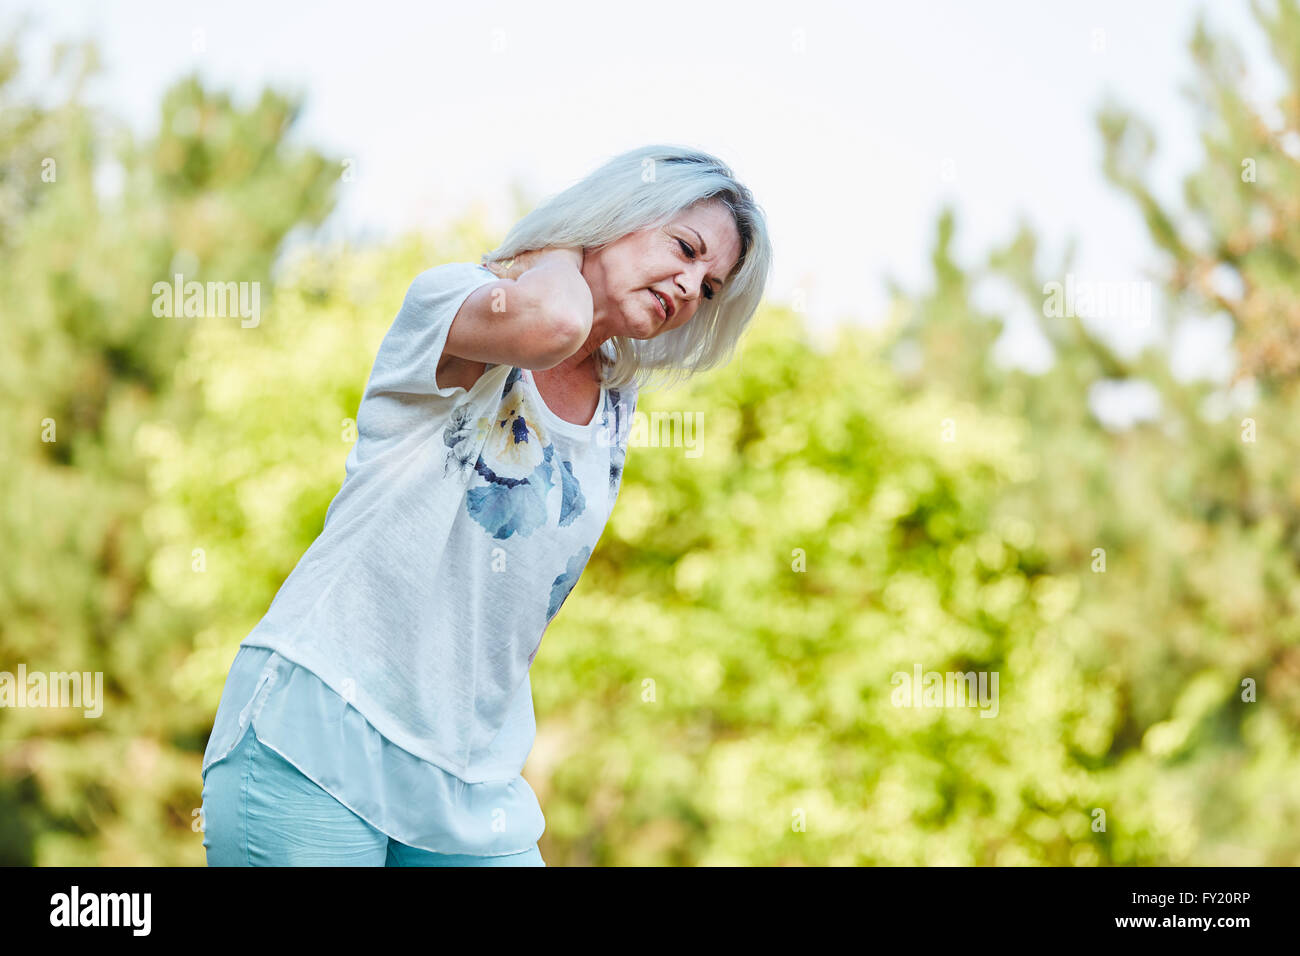 Senior woman with neckpain while walking in the nature Stock Photo